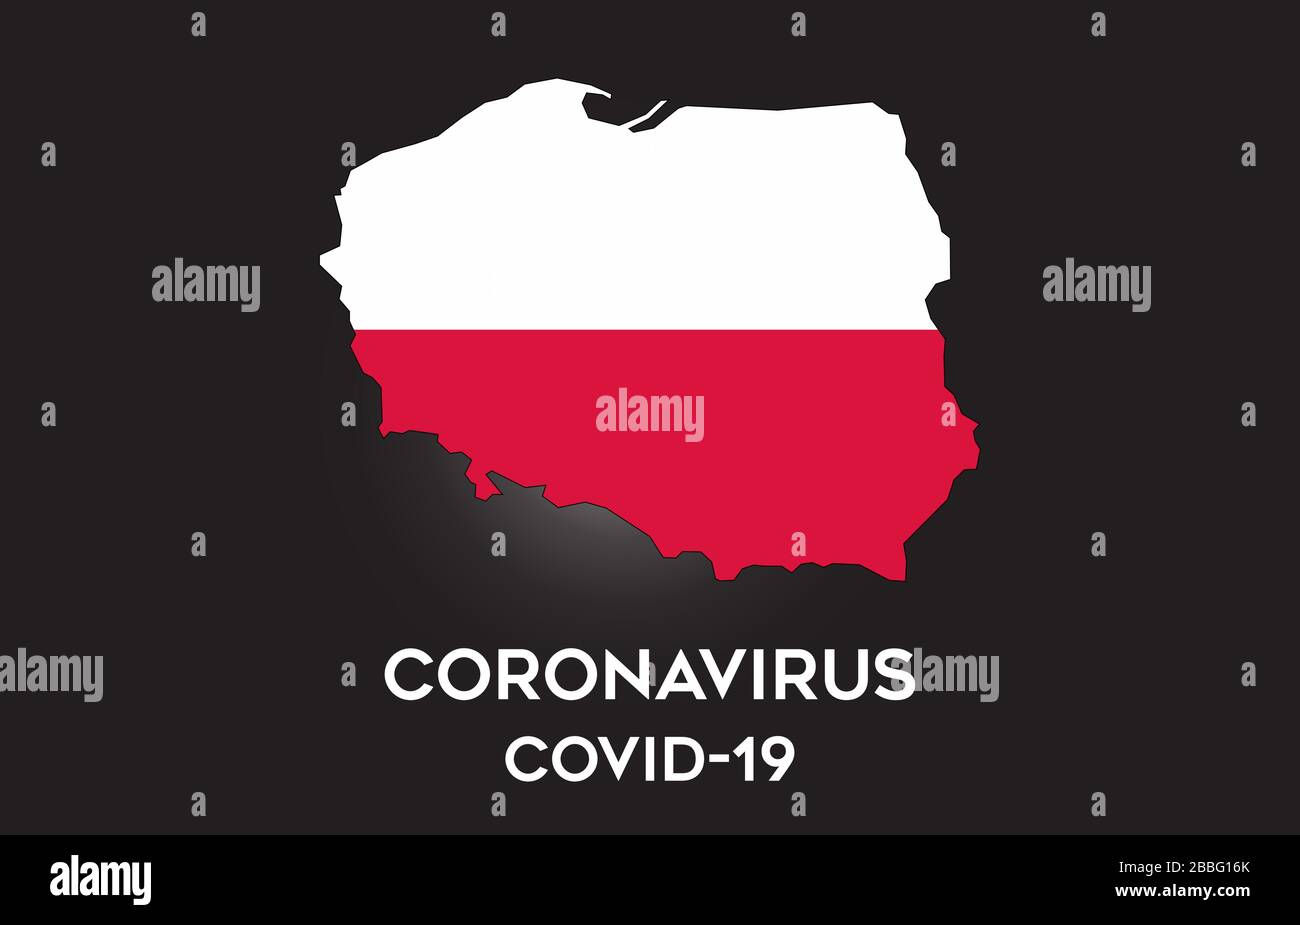 CoronaVirus in Poland and Country flag inside Country border Map Vector Design. Covid-19 with Poland map with national flag Vector Illustration. Stock Vector